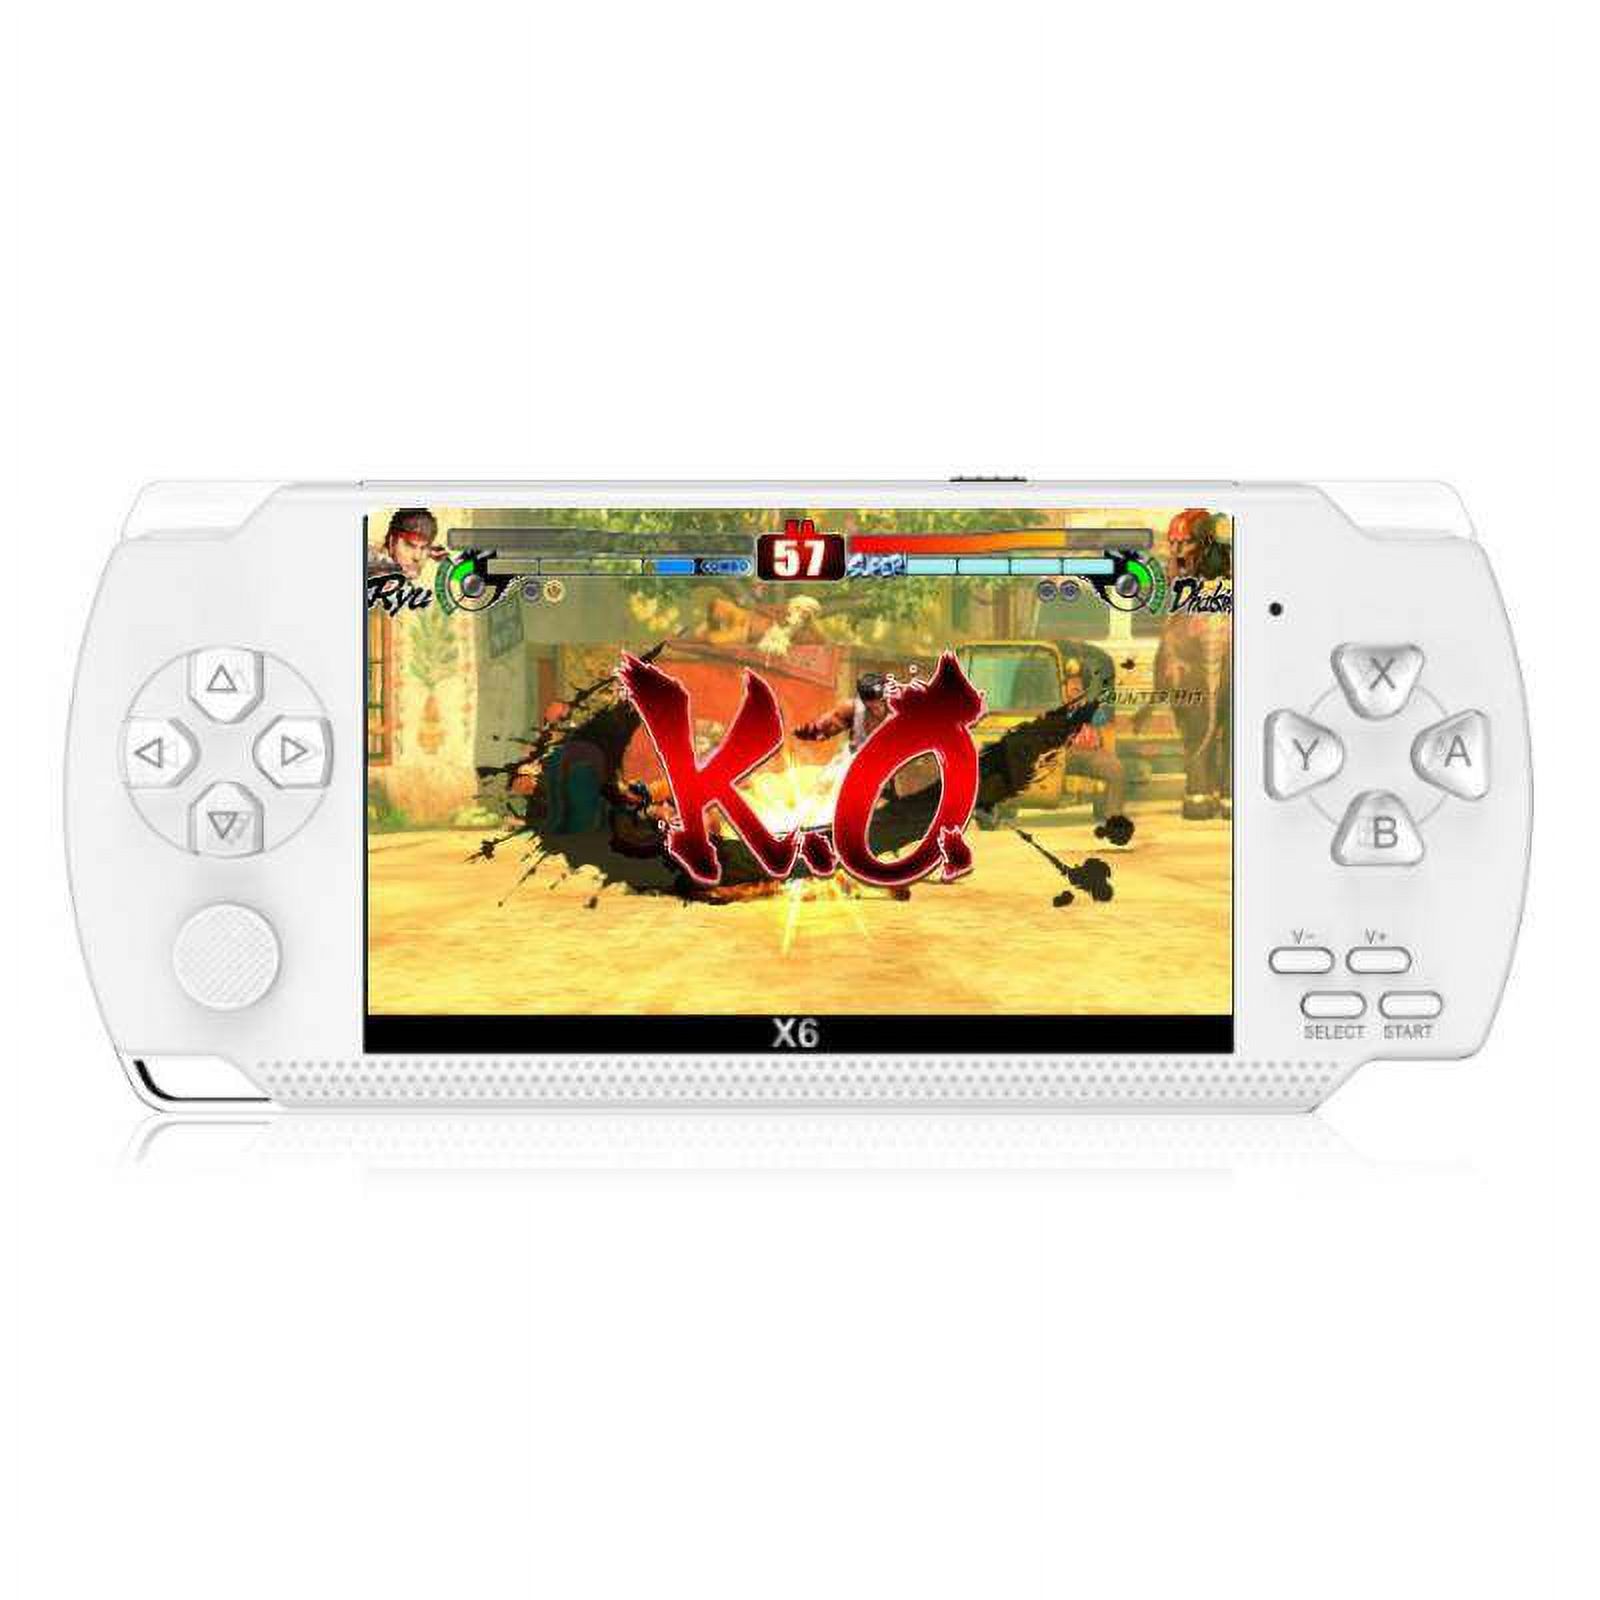 4.3 "PSP 8G ROM handheld game console player, TV output with headphones, portable handheld game console classic retro video game console with 4.1-inch HD screen - image 3 of 3